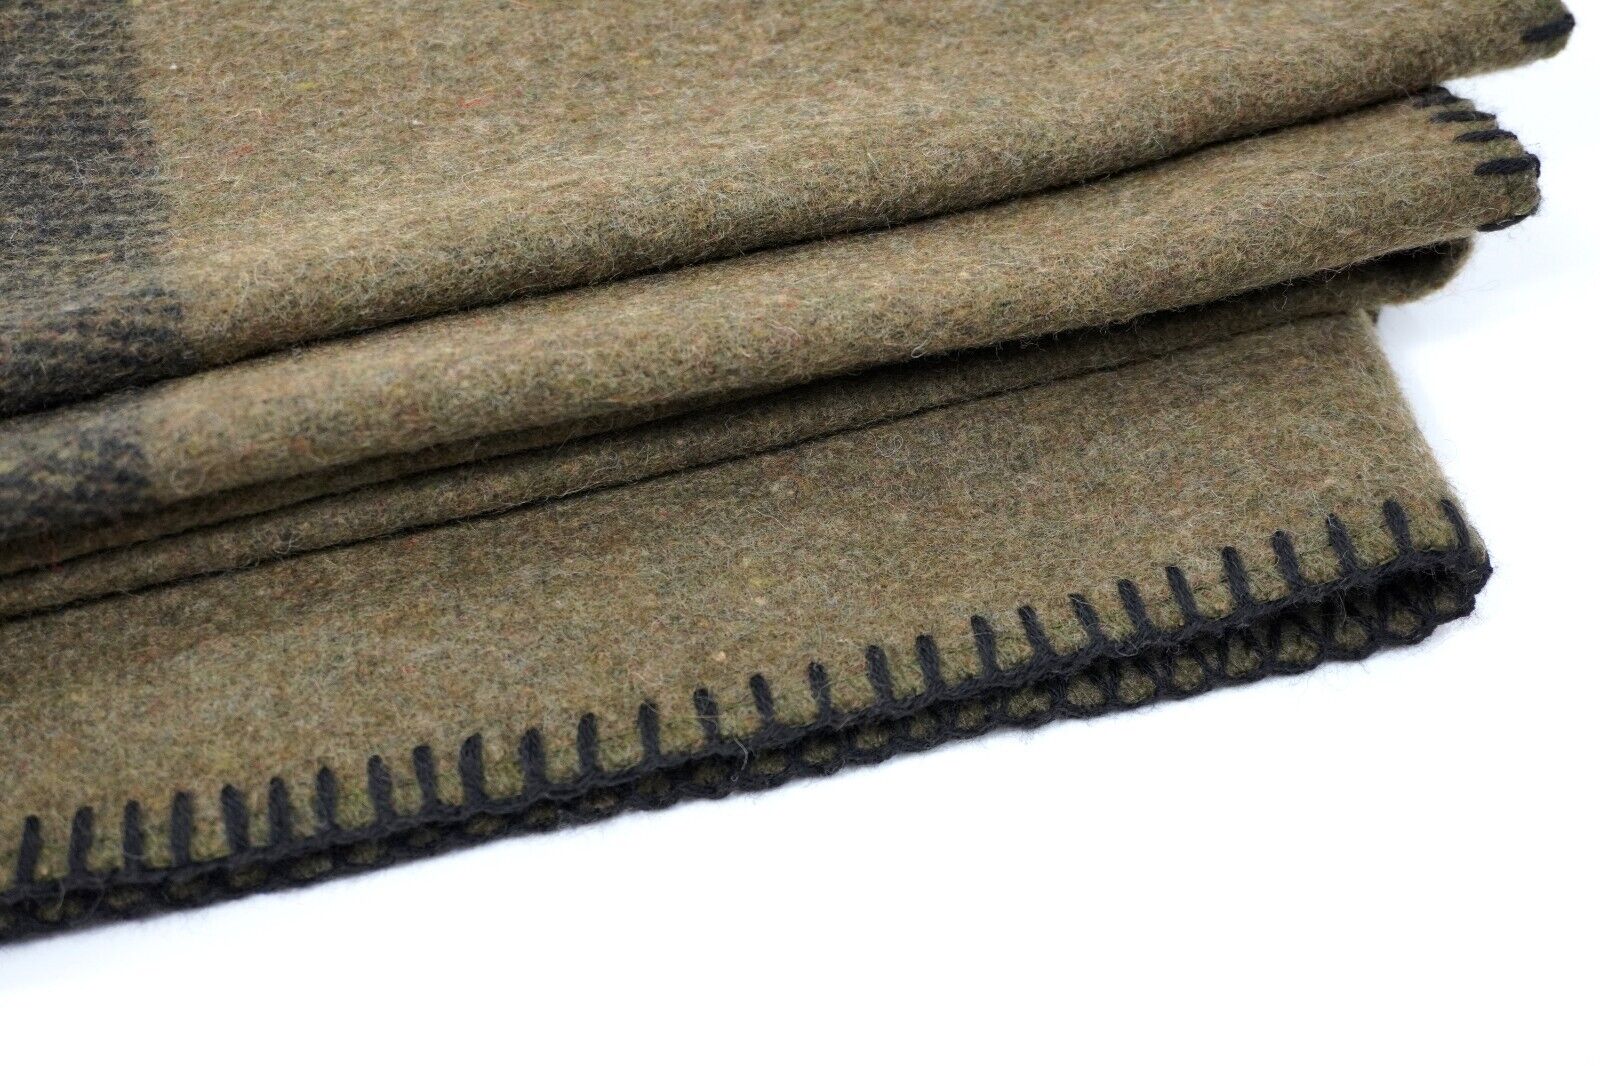 Original German Army Wool Blanket High Quality Thick Surplus Military Issue